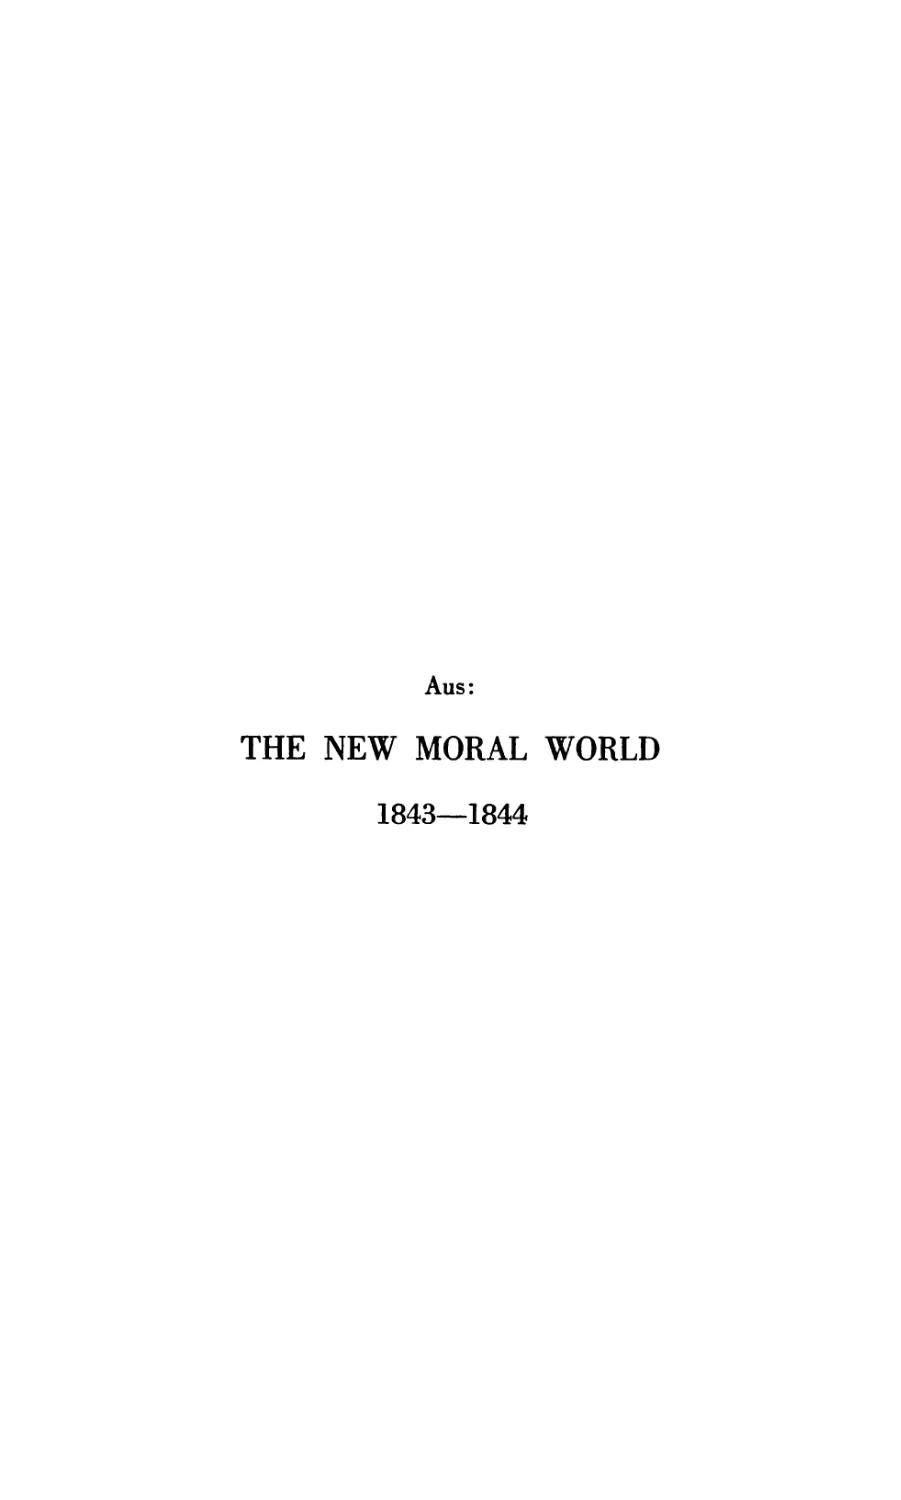 Aus: The New Moral World. 1843—1844